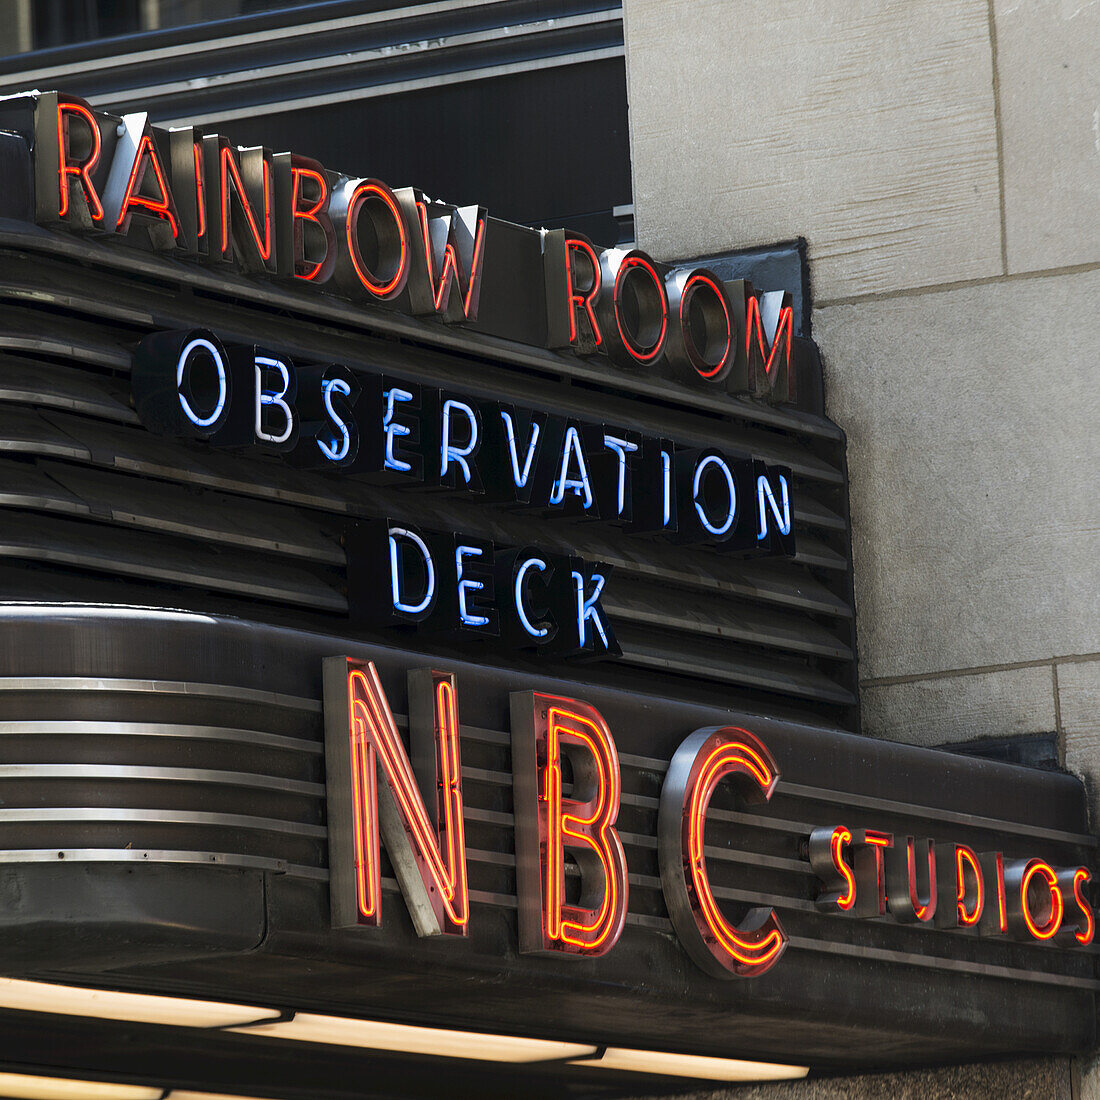 Sign For Nbc Studios Rainbow Room Observation Deck; New York City, New York, United States Of America